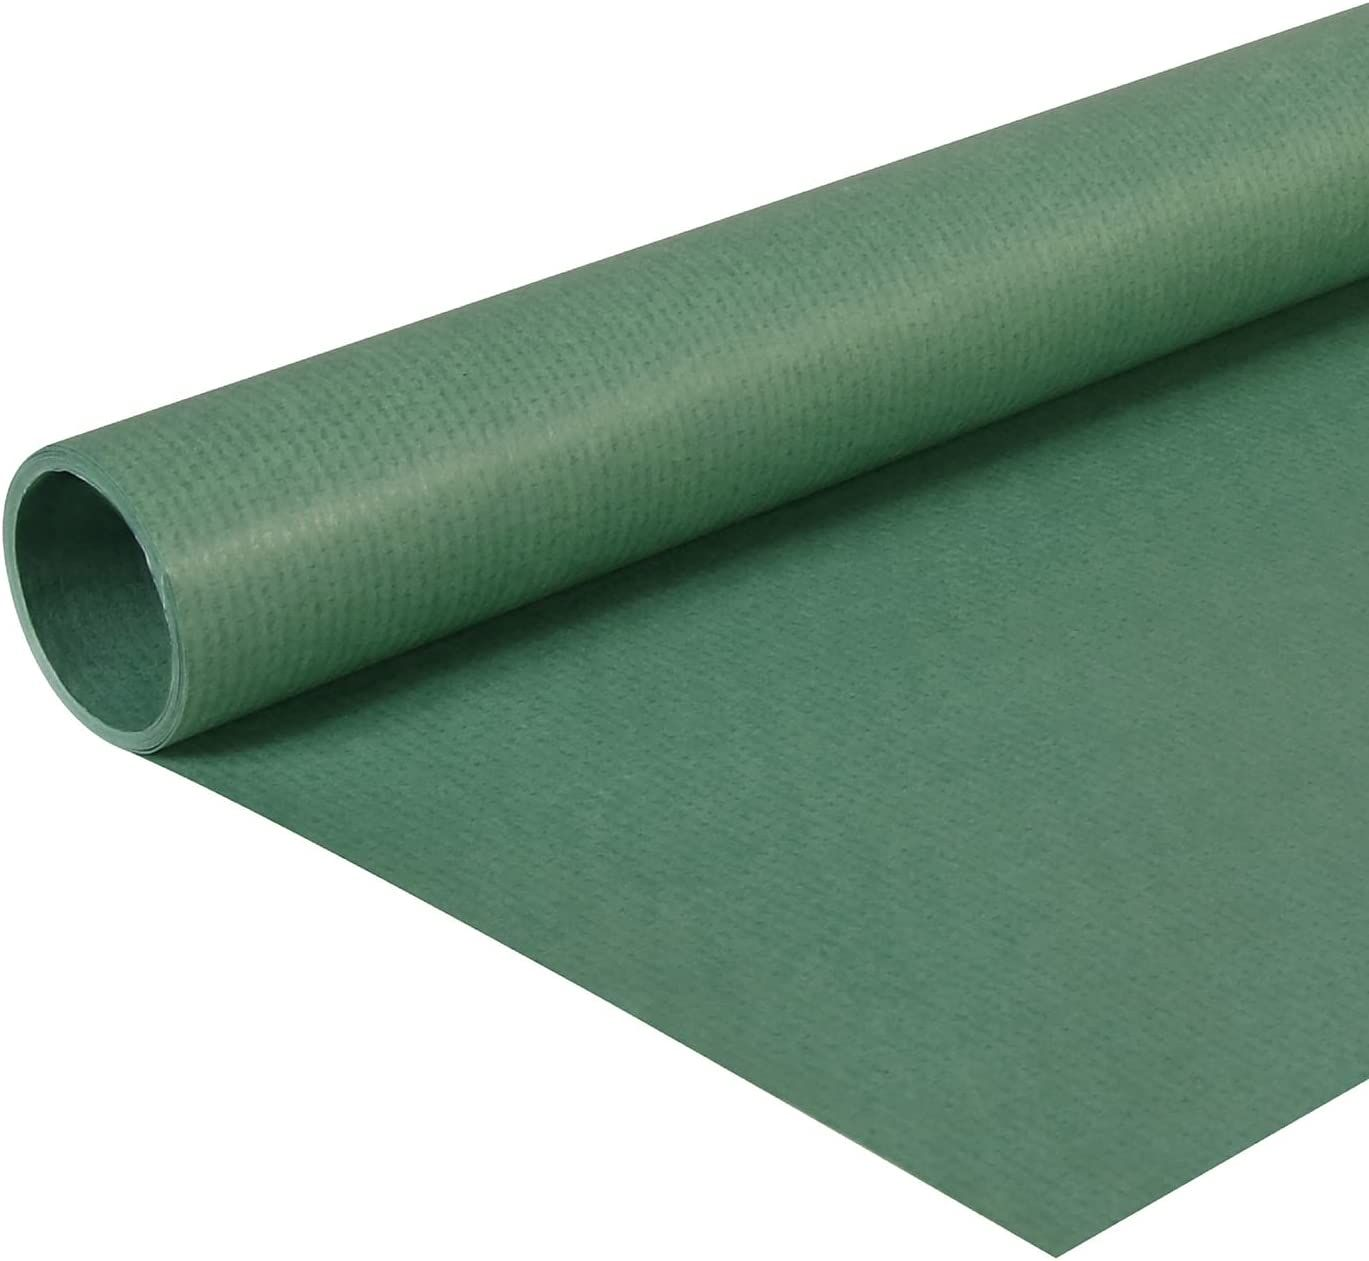 Clairefontaine Wrapping Paper Roll Dark Green 10 x 0.7M RRP 11.99 CLEARANCE XL 7.99